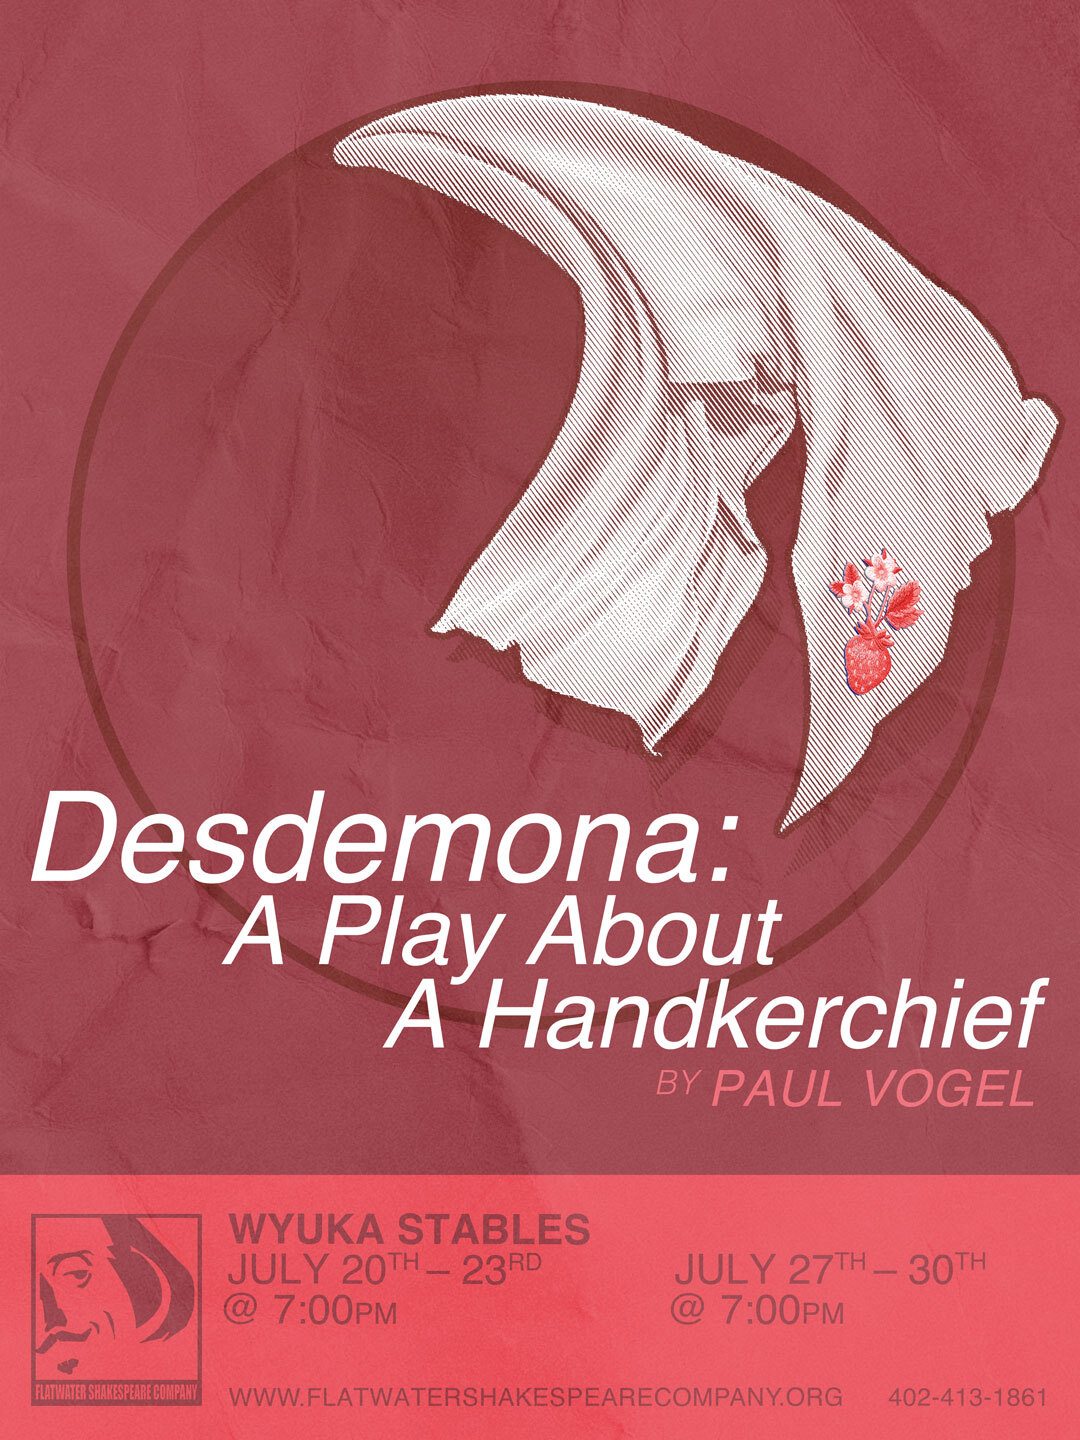 7/23 ADU - ADULT: Sun. July 23, 2023 | 7:00 p.m. - 10:00 p.m. CST | Wyuka Stables (Desdemona: A Play about a Handkerchief)